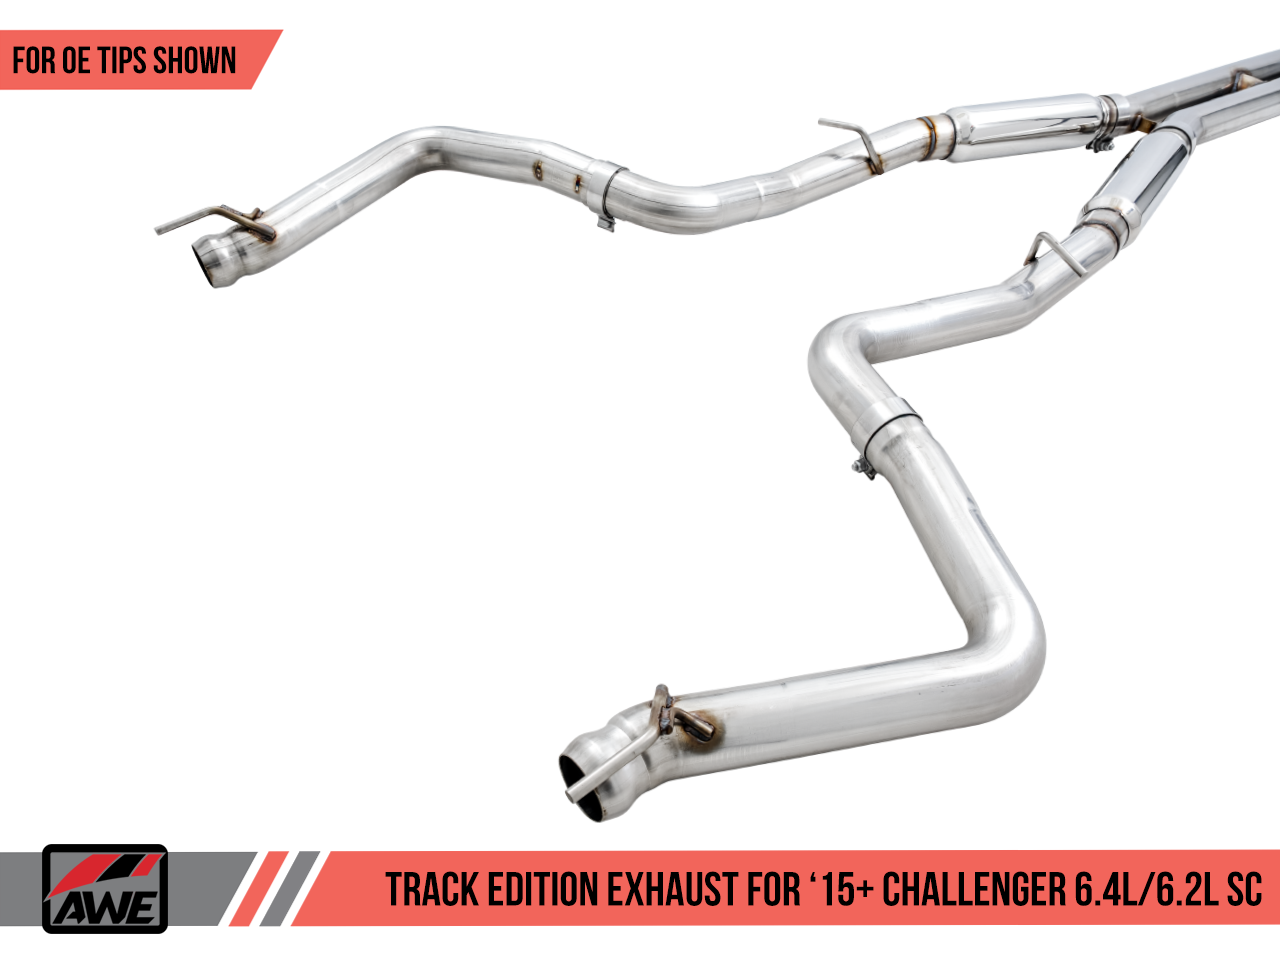 Track Edition Exhaust for 15+ Challenger 6.4 /